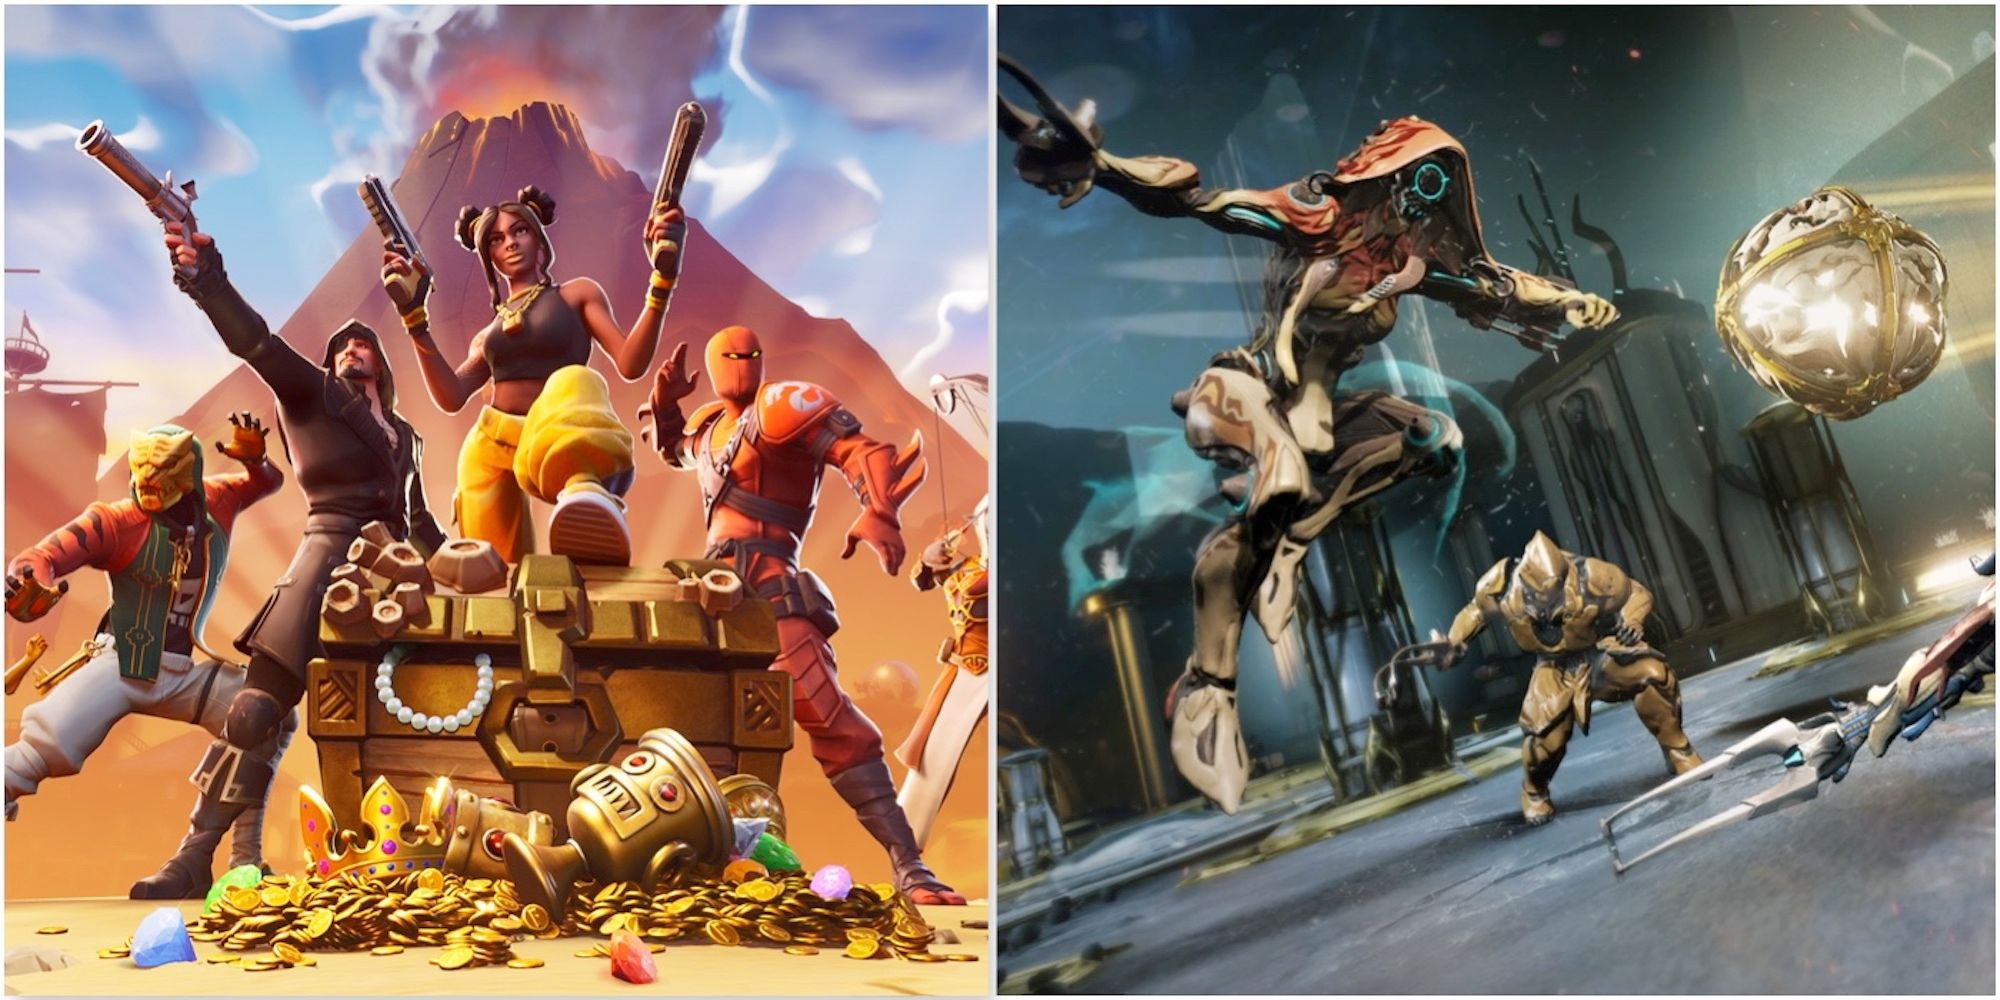 Promo art featuring characters from Fortnite and Warframe